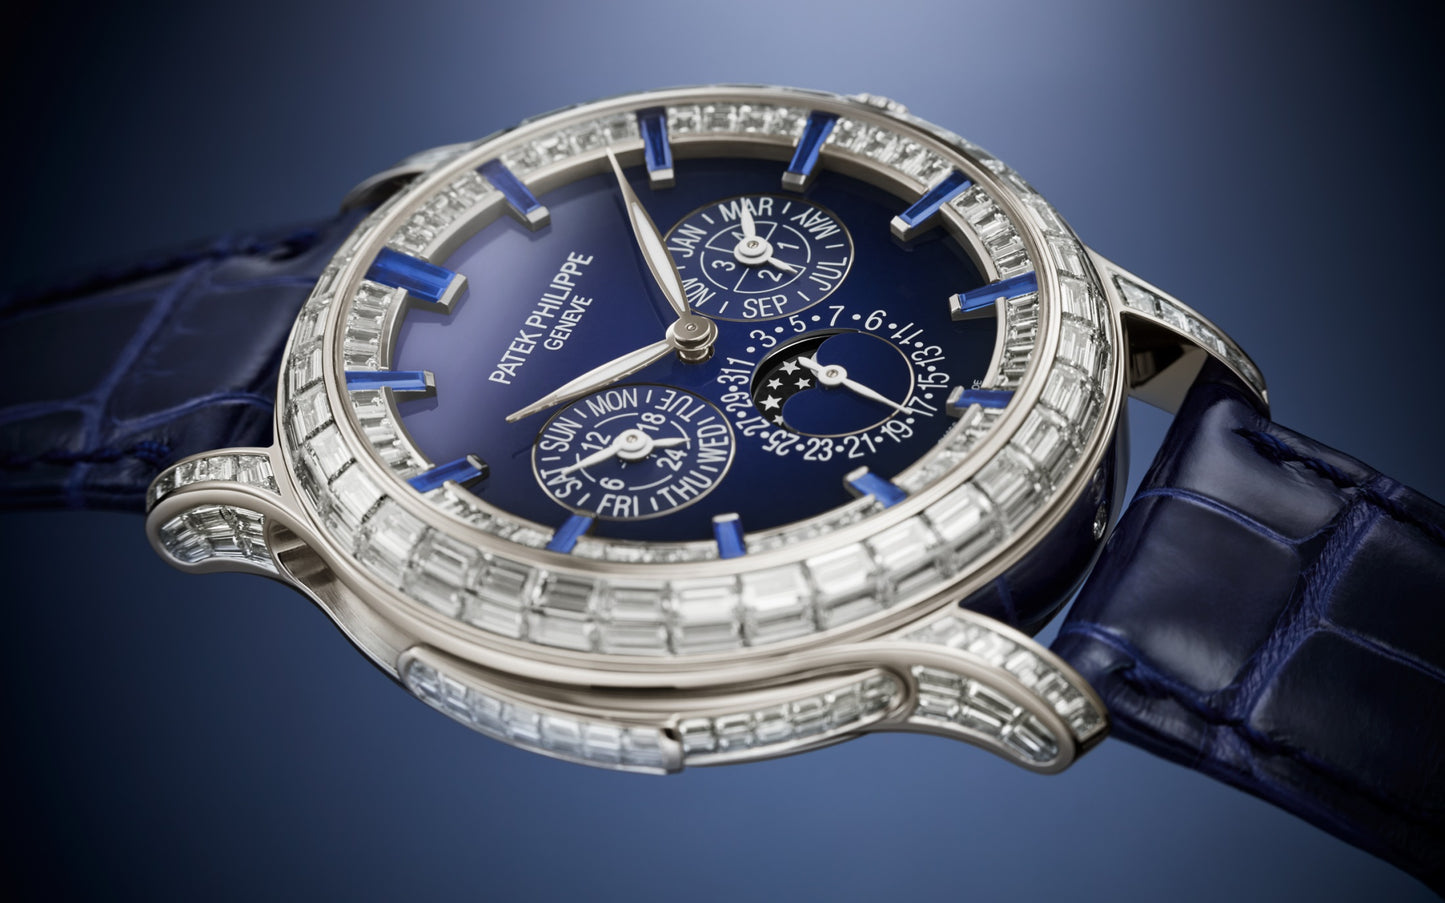 Patek Philippe Grand Complication, Platinum set with baguette diamonds and sapphires, 42mm, Ref# 5374/300P-001, Side